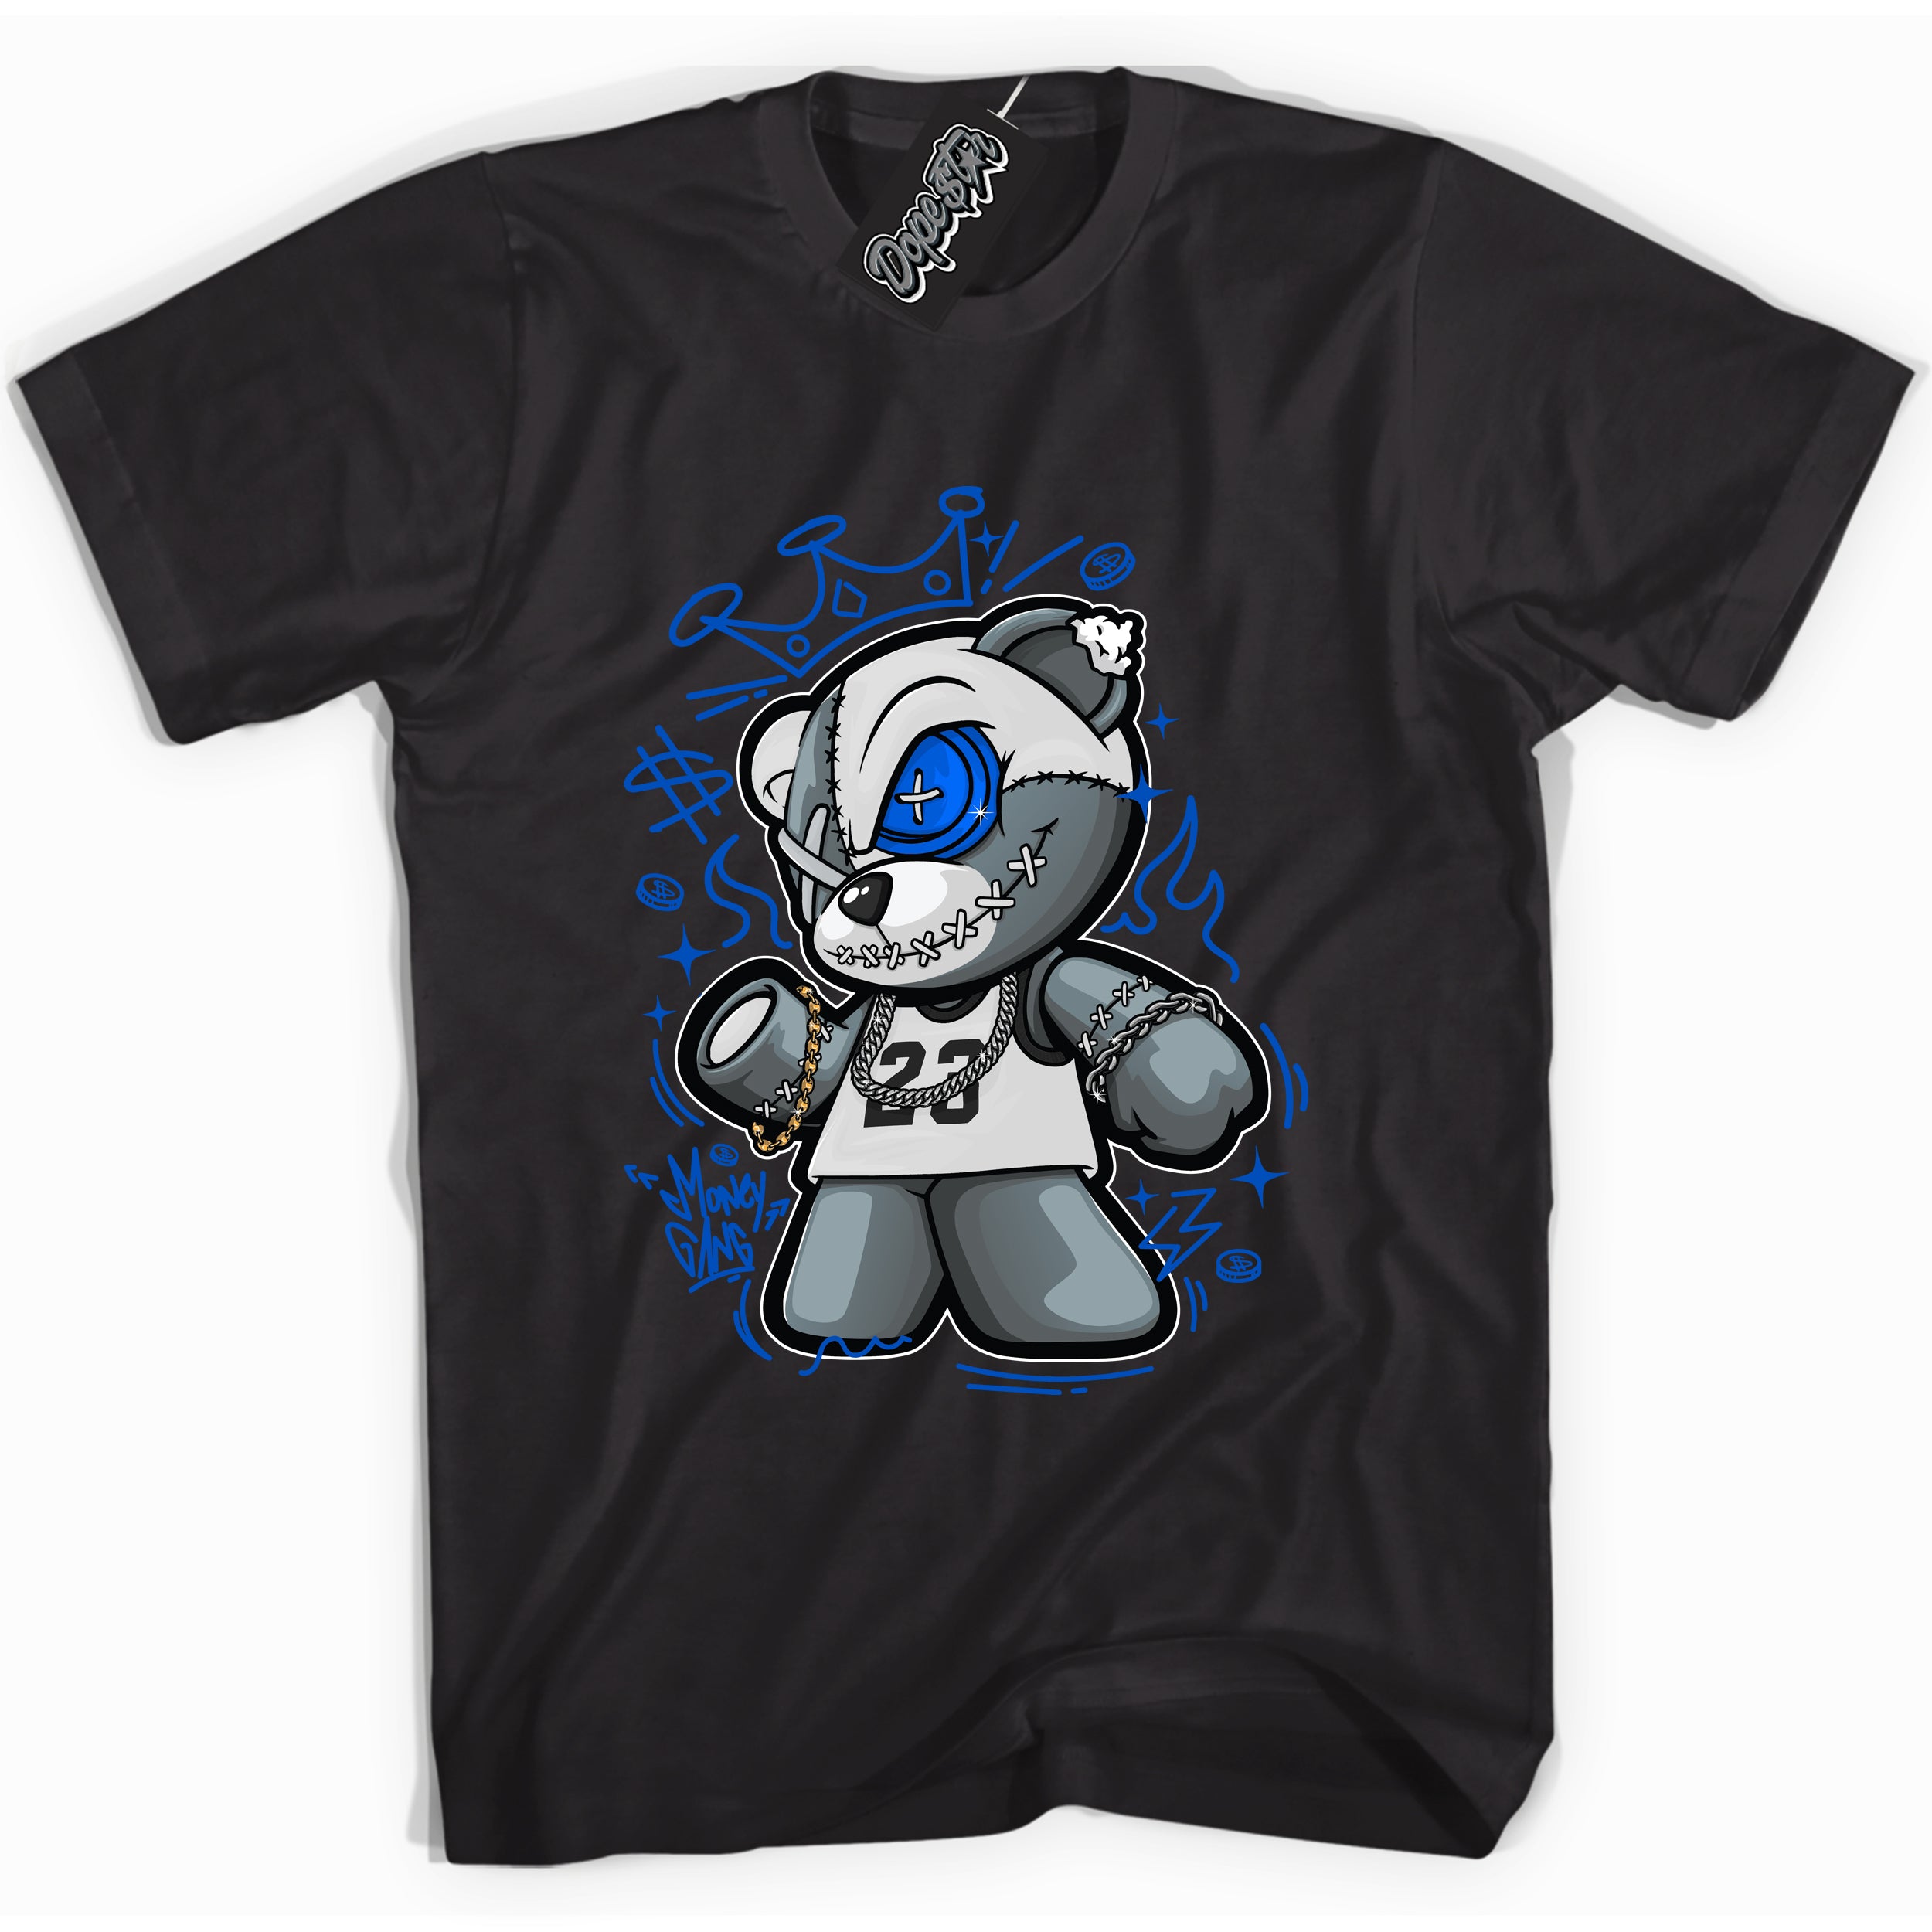 Cool Black graphic tee with "Money Gang Bear" design, that perfectly matches Royal Reimagined 1s sneakers 